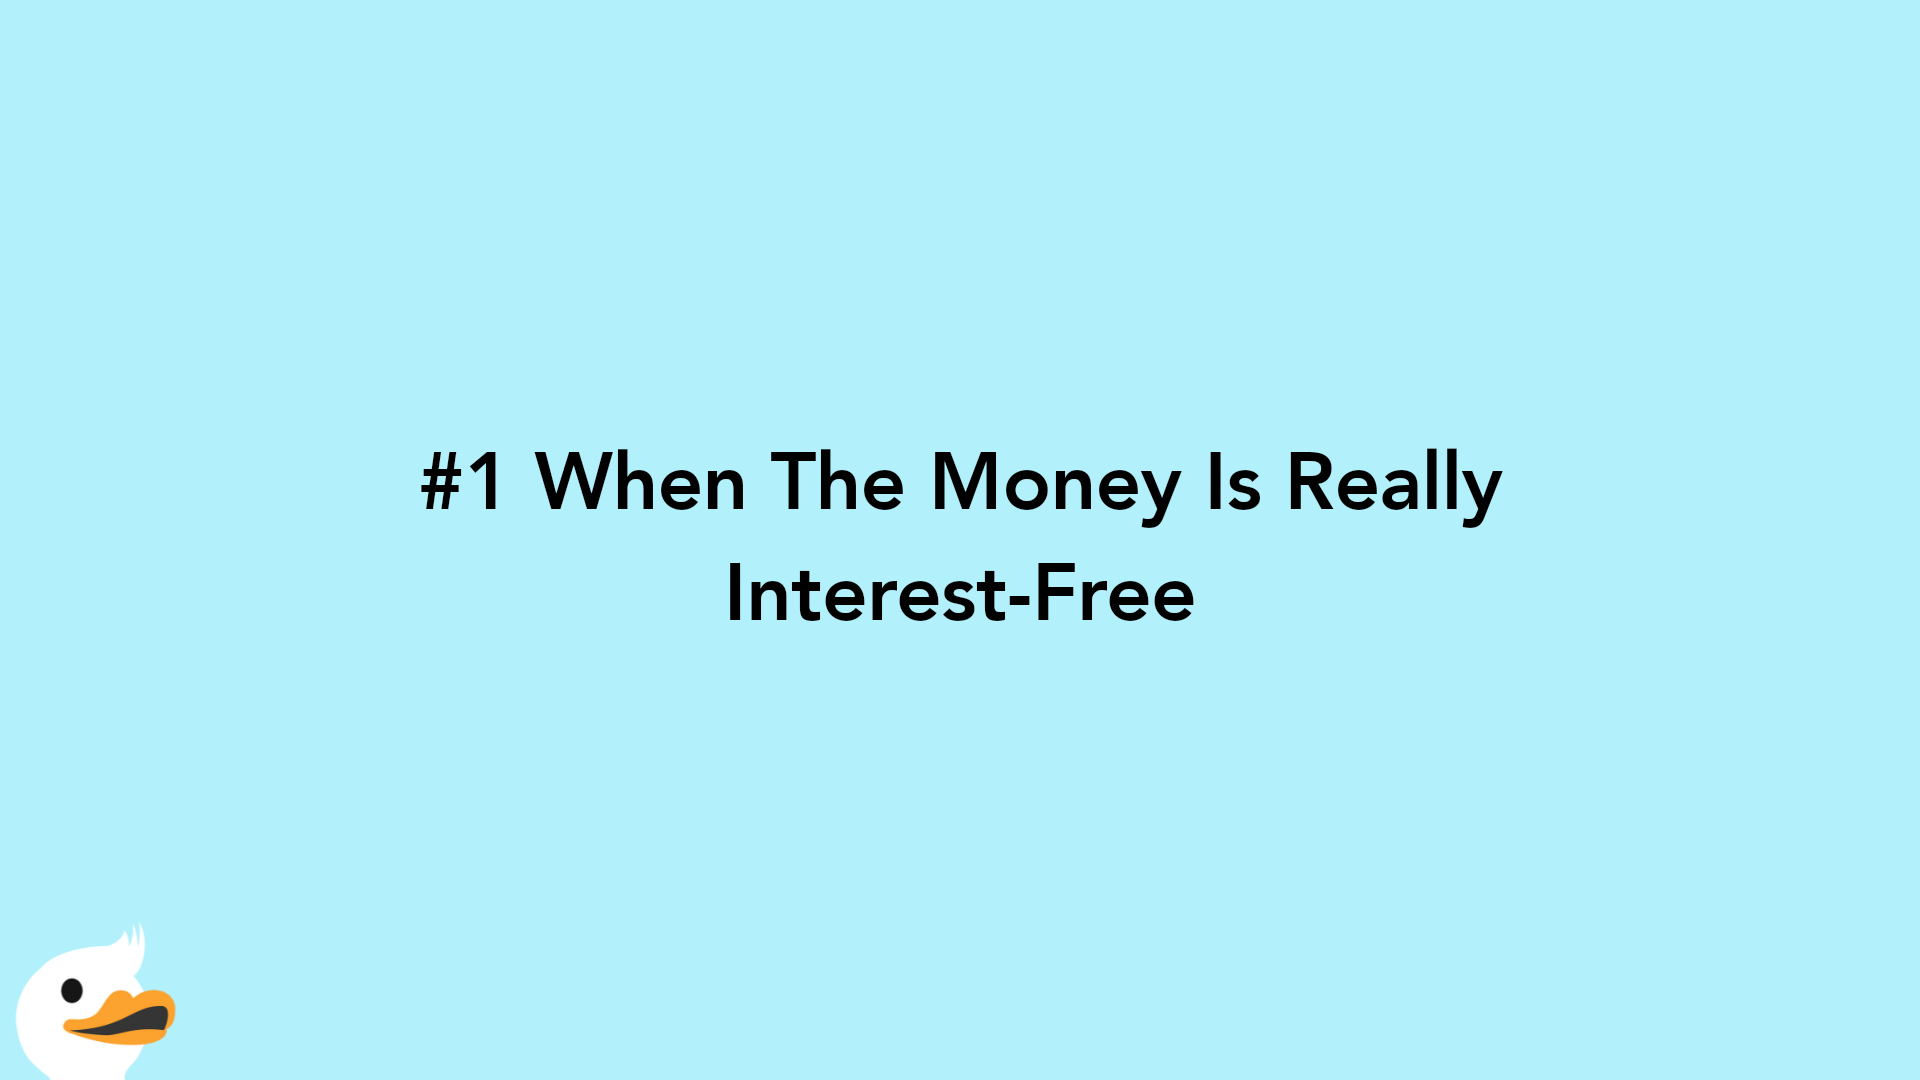 #1 When The Money Is Really Interest-Free